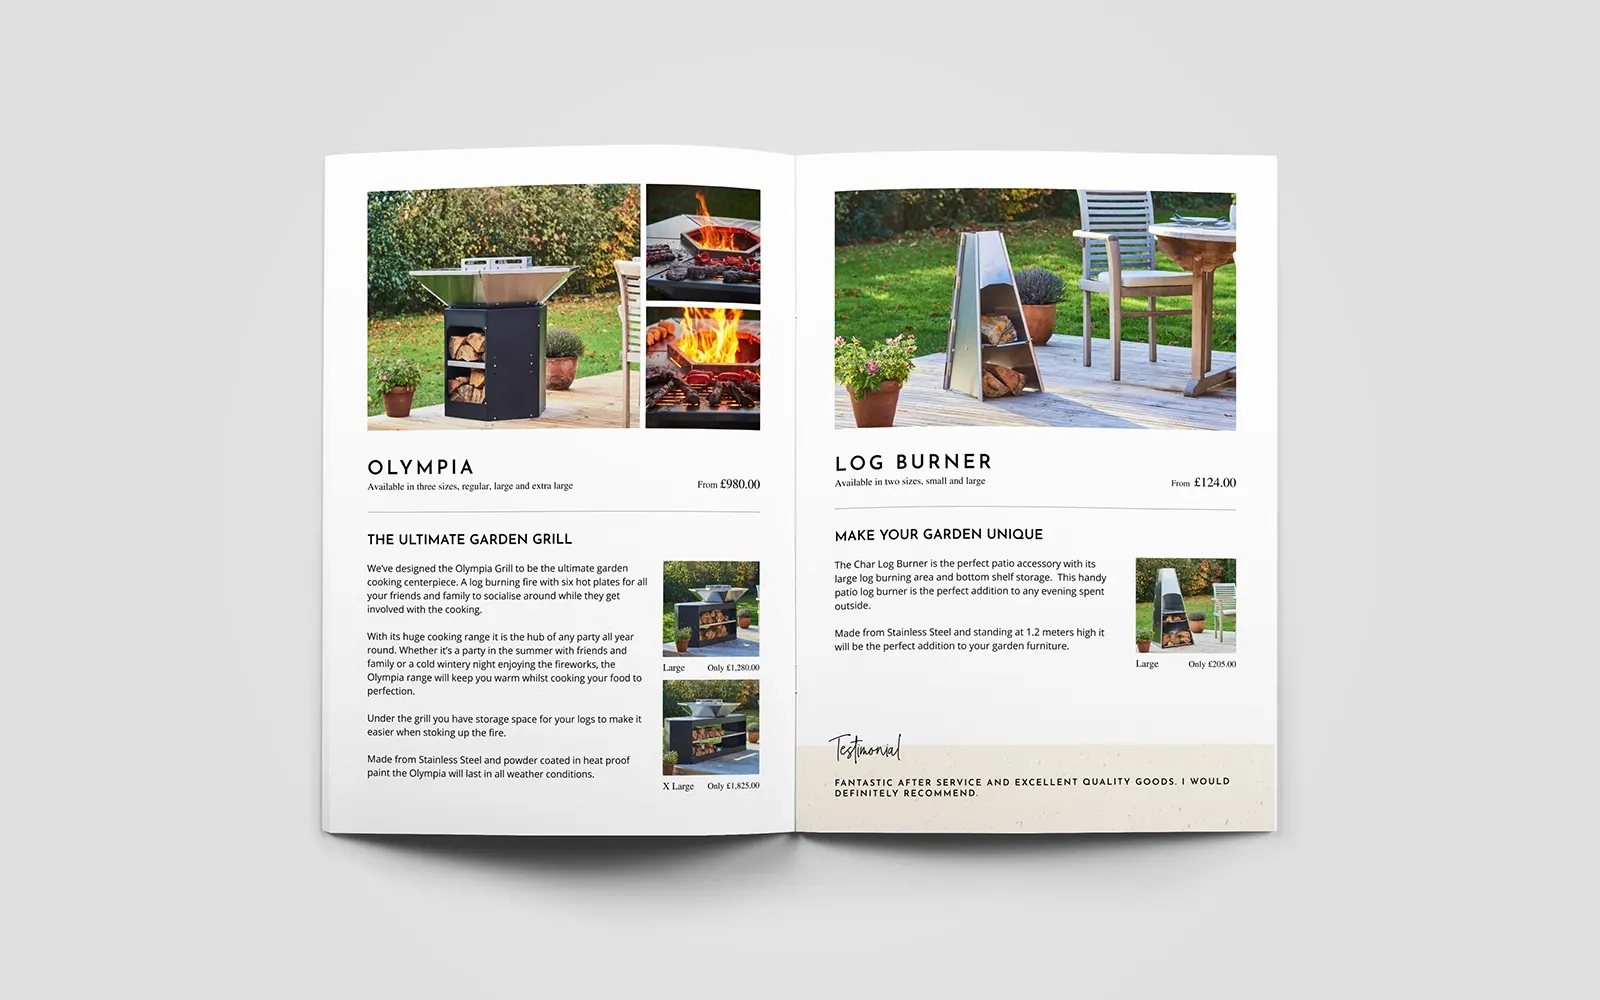 A two page spread of the brochure showing photos and information about the grills and log burners on offer